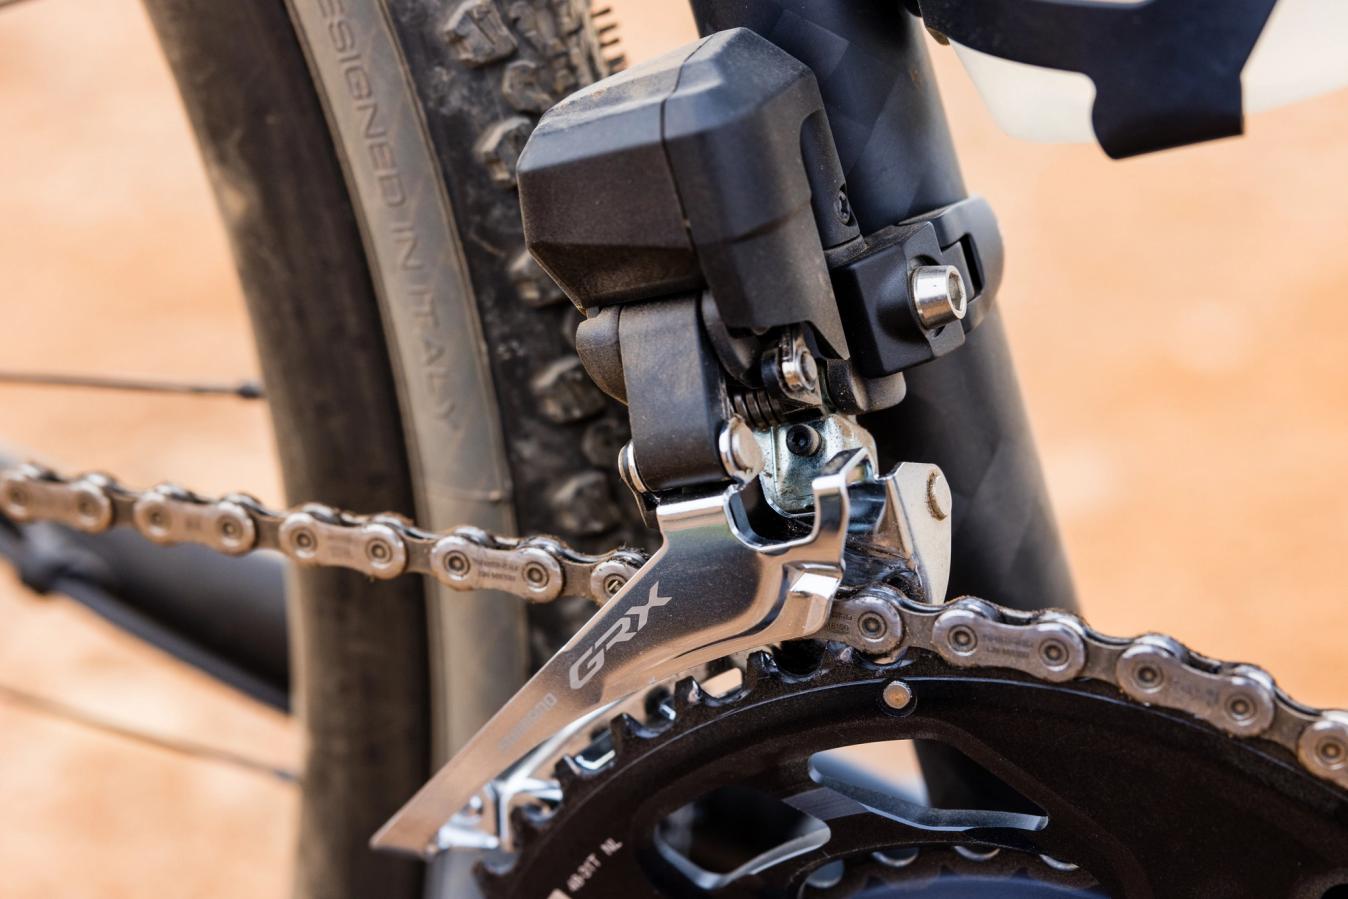 Semi-wireless shifting has arrived at the GRX groupset for the first time